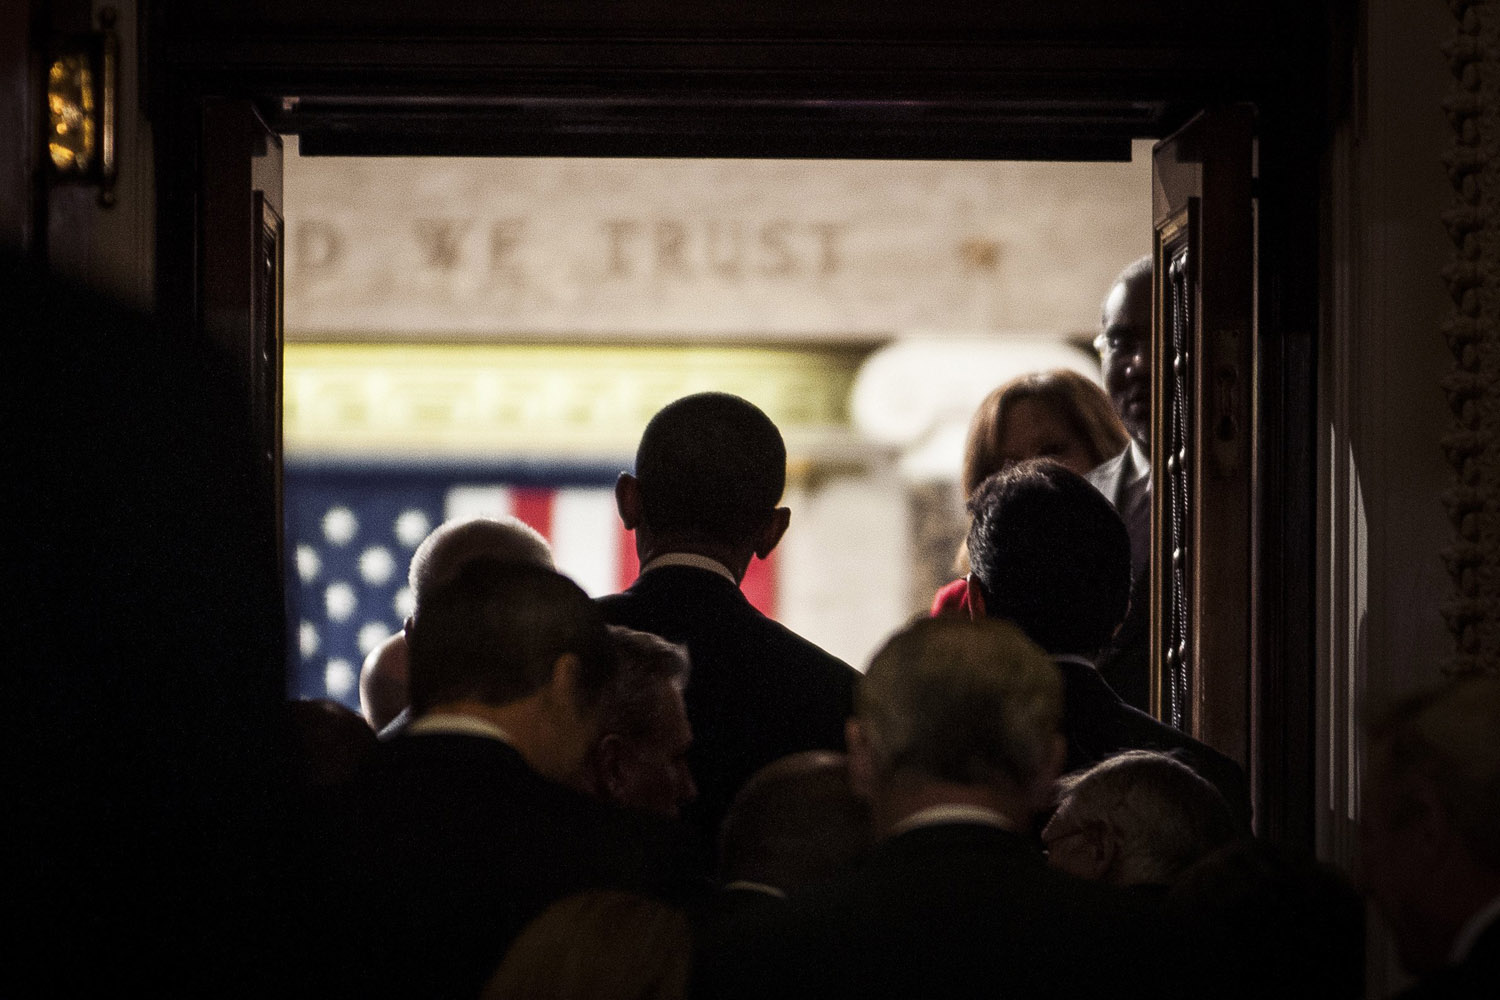 President Barack Obama enters the House Chamber of the Capitol Building to deliver the State of the Union address.